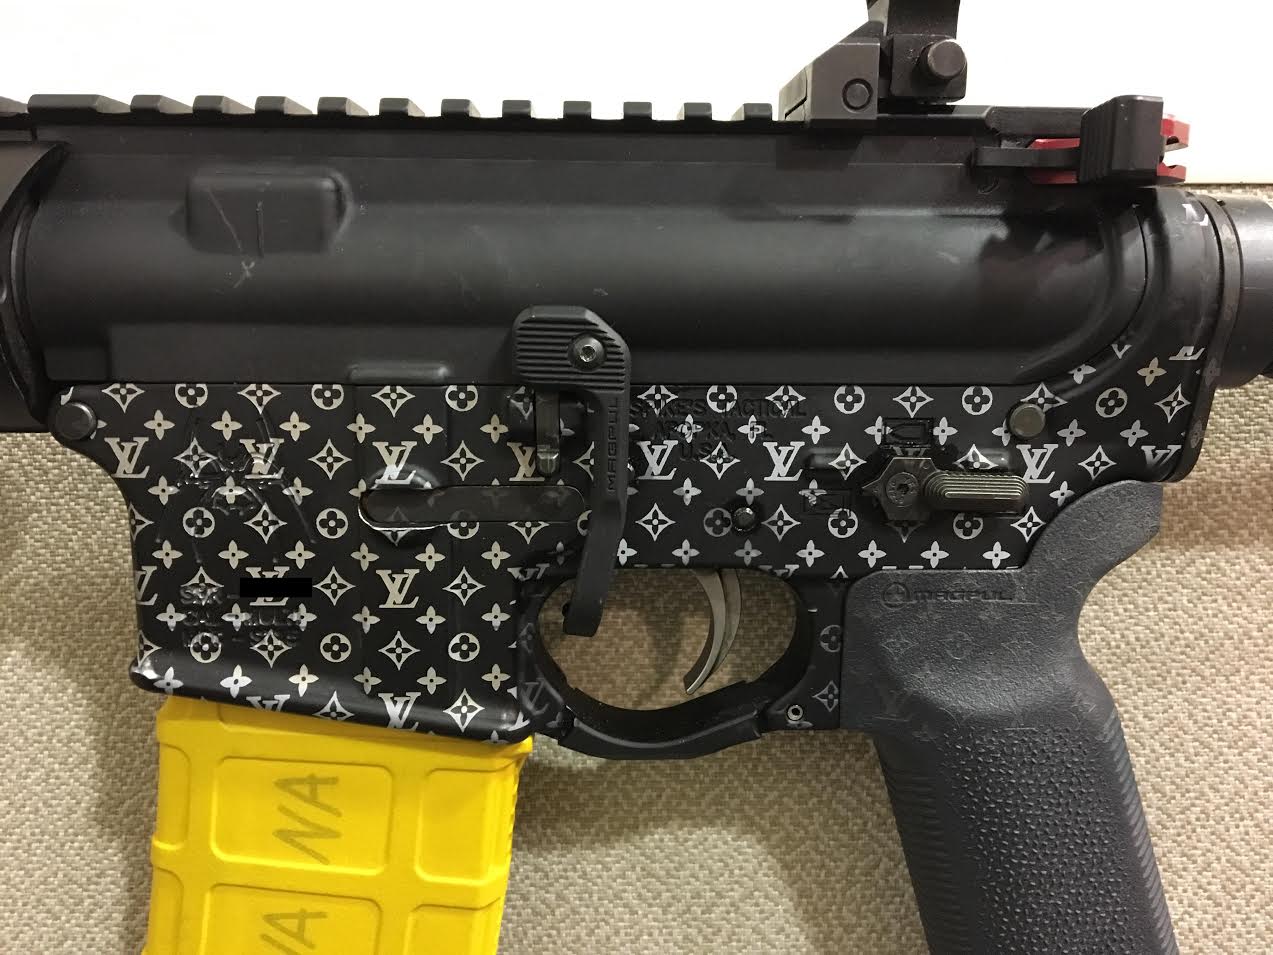 Larry Vuitton Print On The AR-15 With The Banana Clip